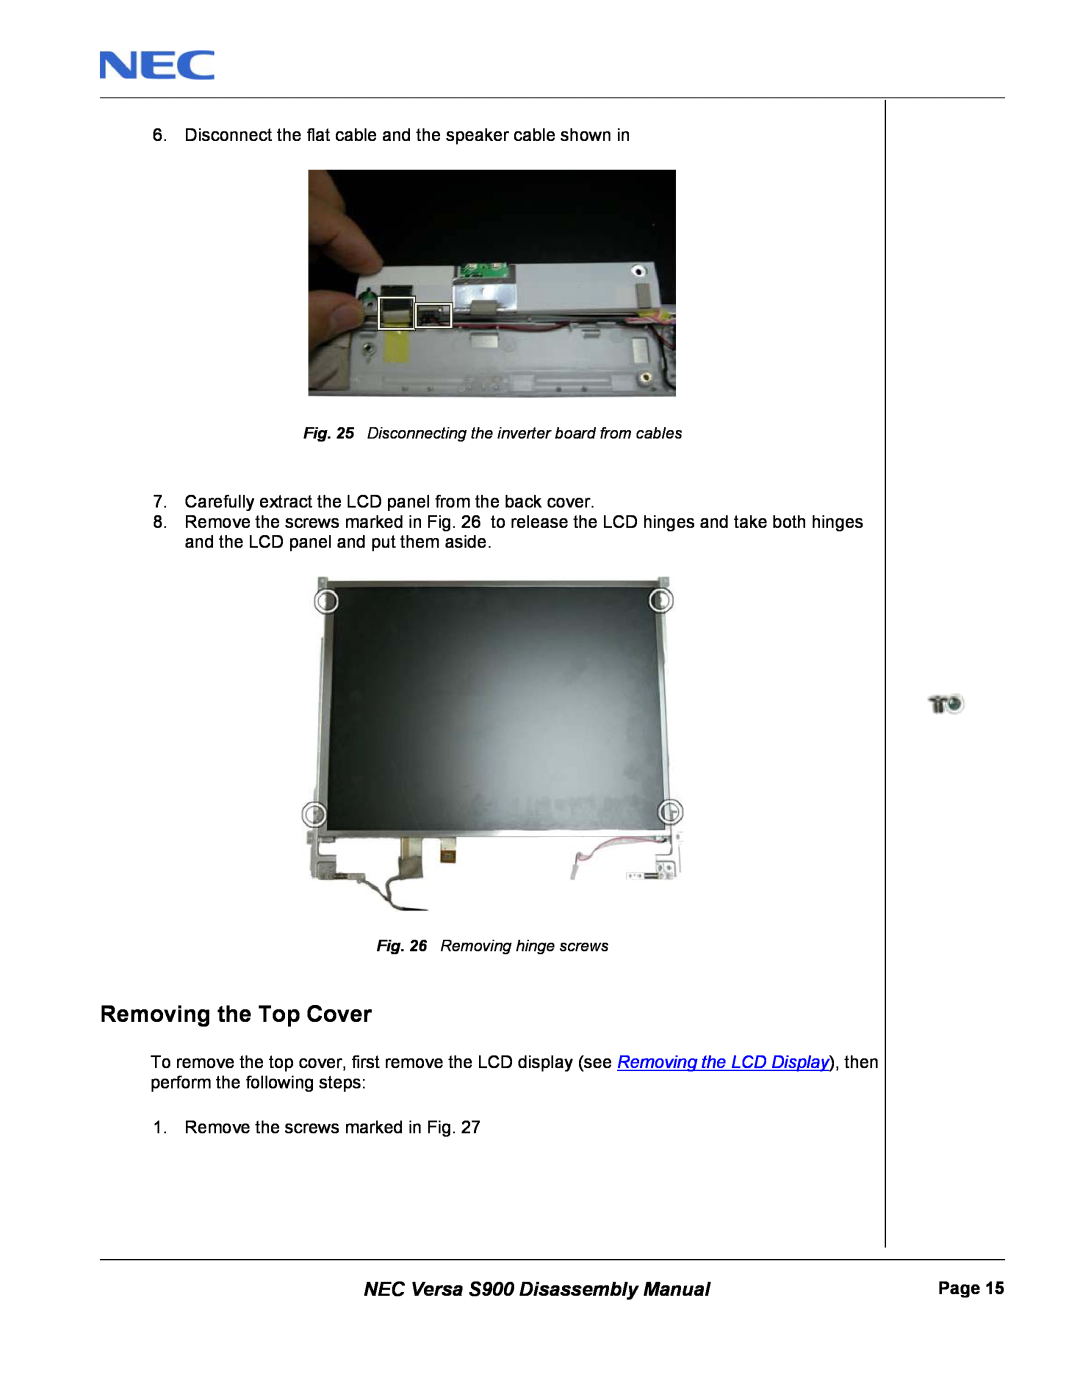 NEC manual Removing the Top Cover, NEC Versa S900 Disassembly Manual 